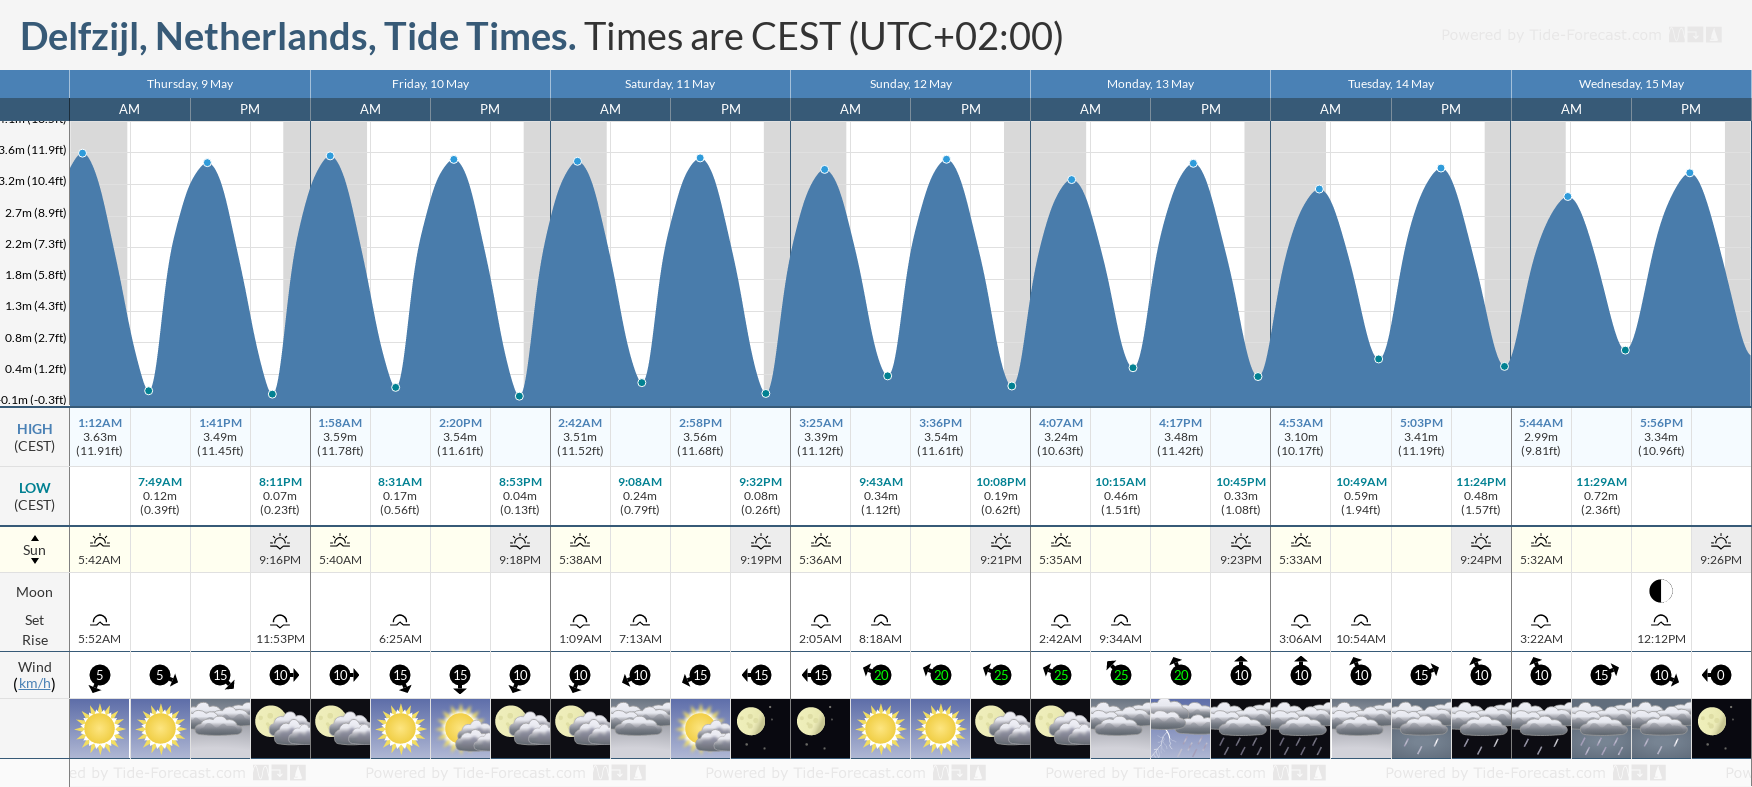 Delfzijl, Netherlands Tide Chart including high and low tide tide times for the next 7 days